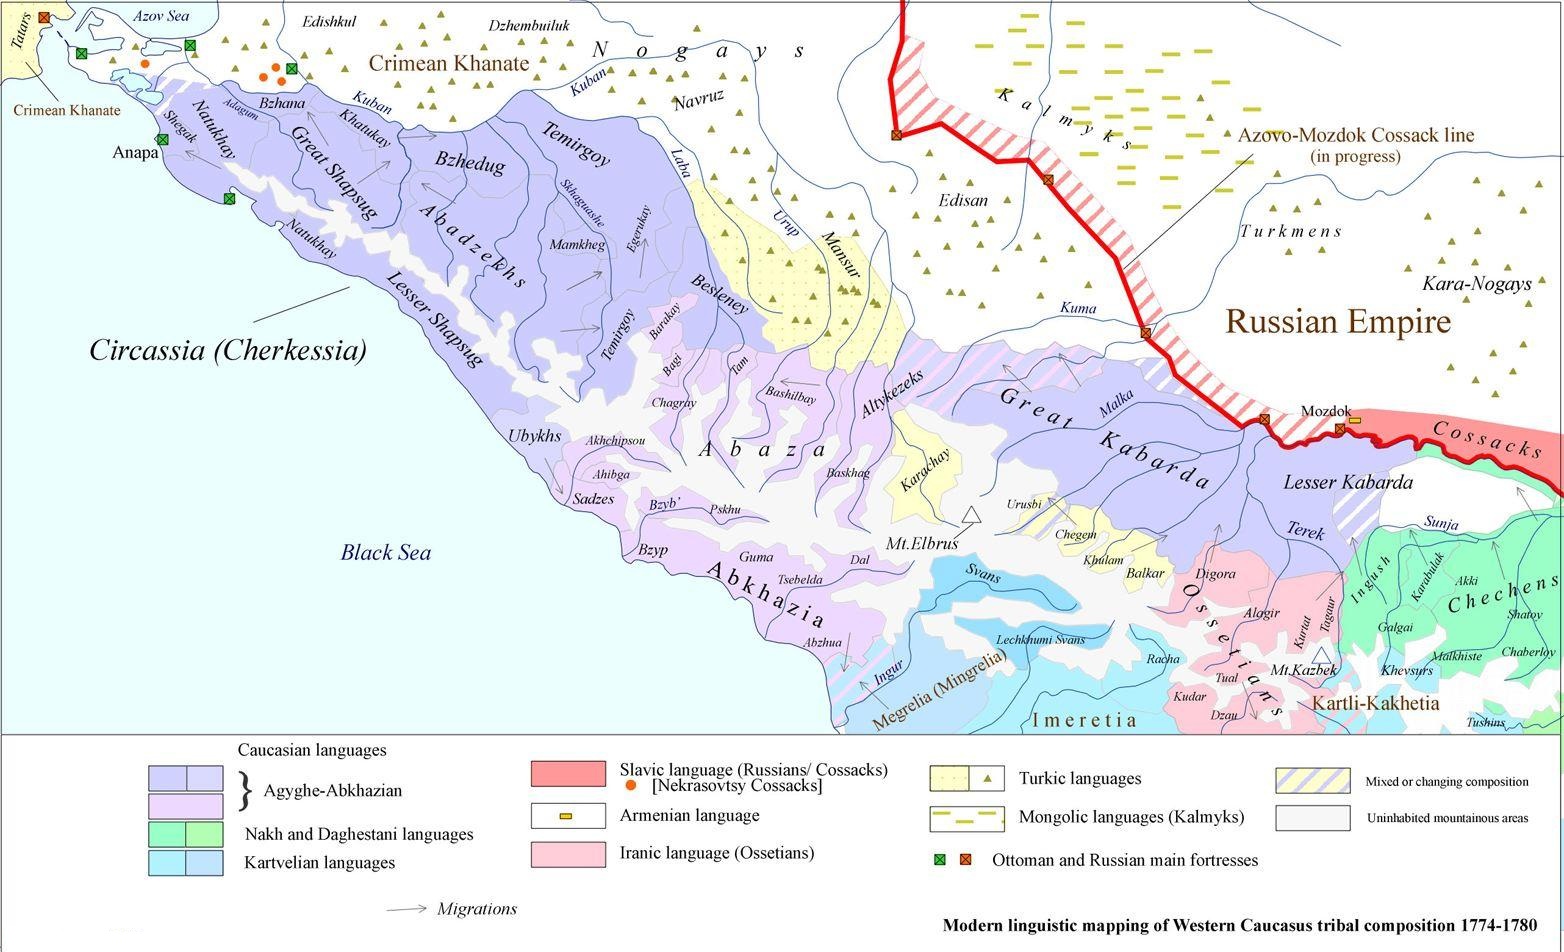 Modern linguistic mapping of Western Caucasus tribal composition 1774-1780 